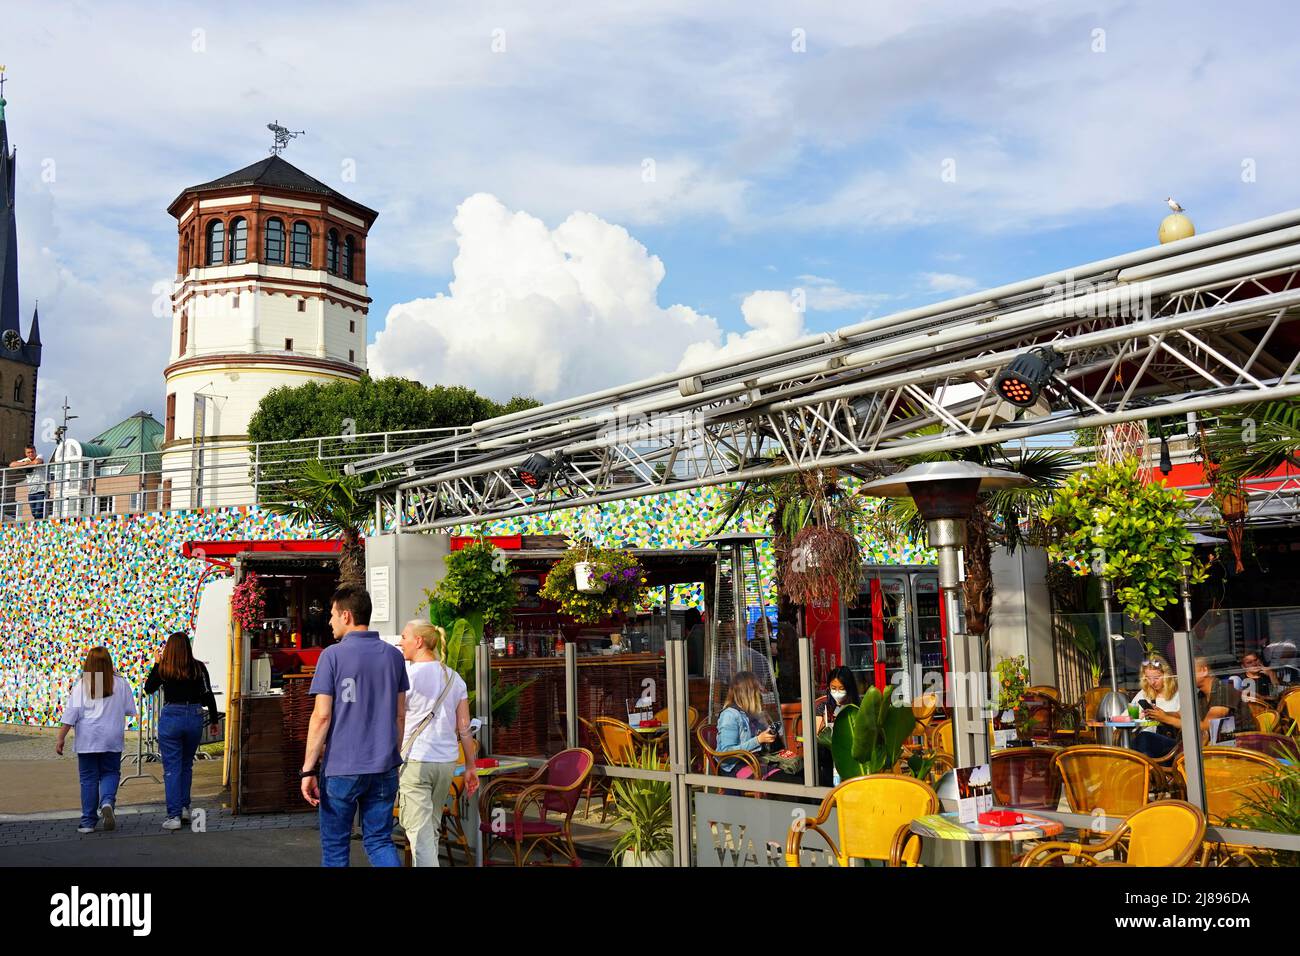 The popular tourist attraction Rhine river promenade in Düsseldorf/Germany with outdoor restaurant and historic castle tower in the background. Stock Photo